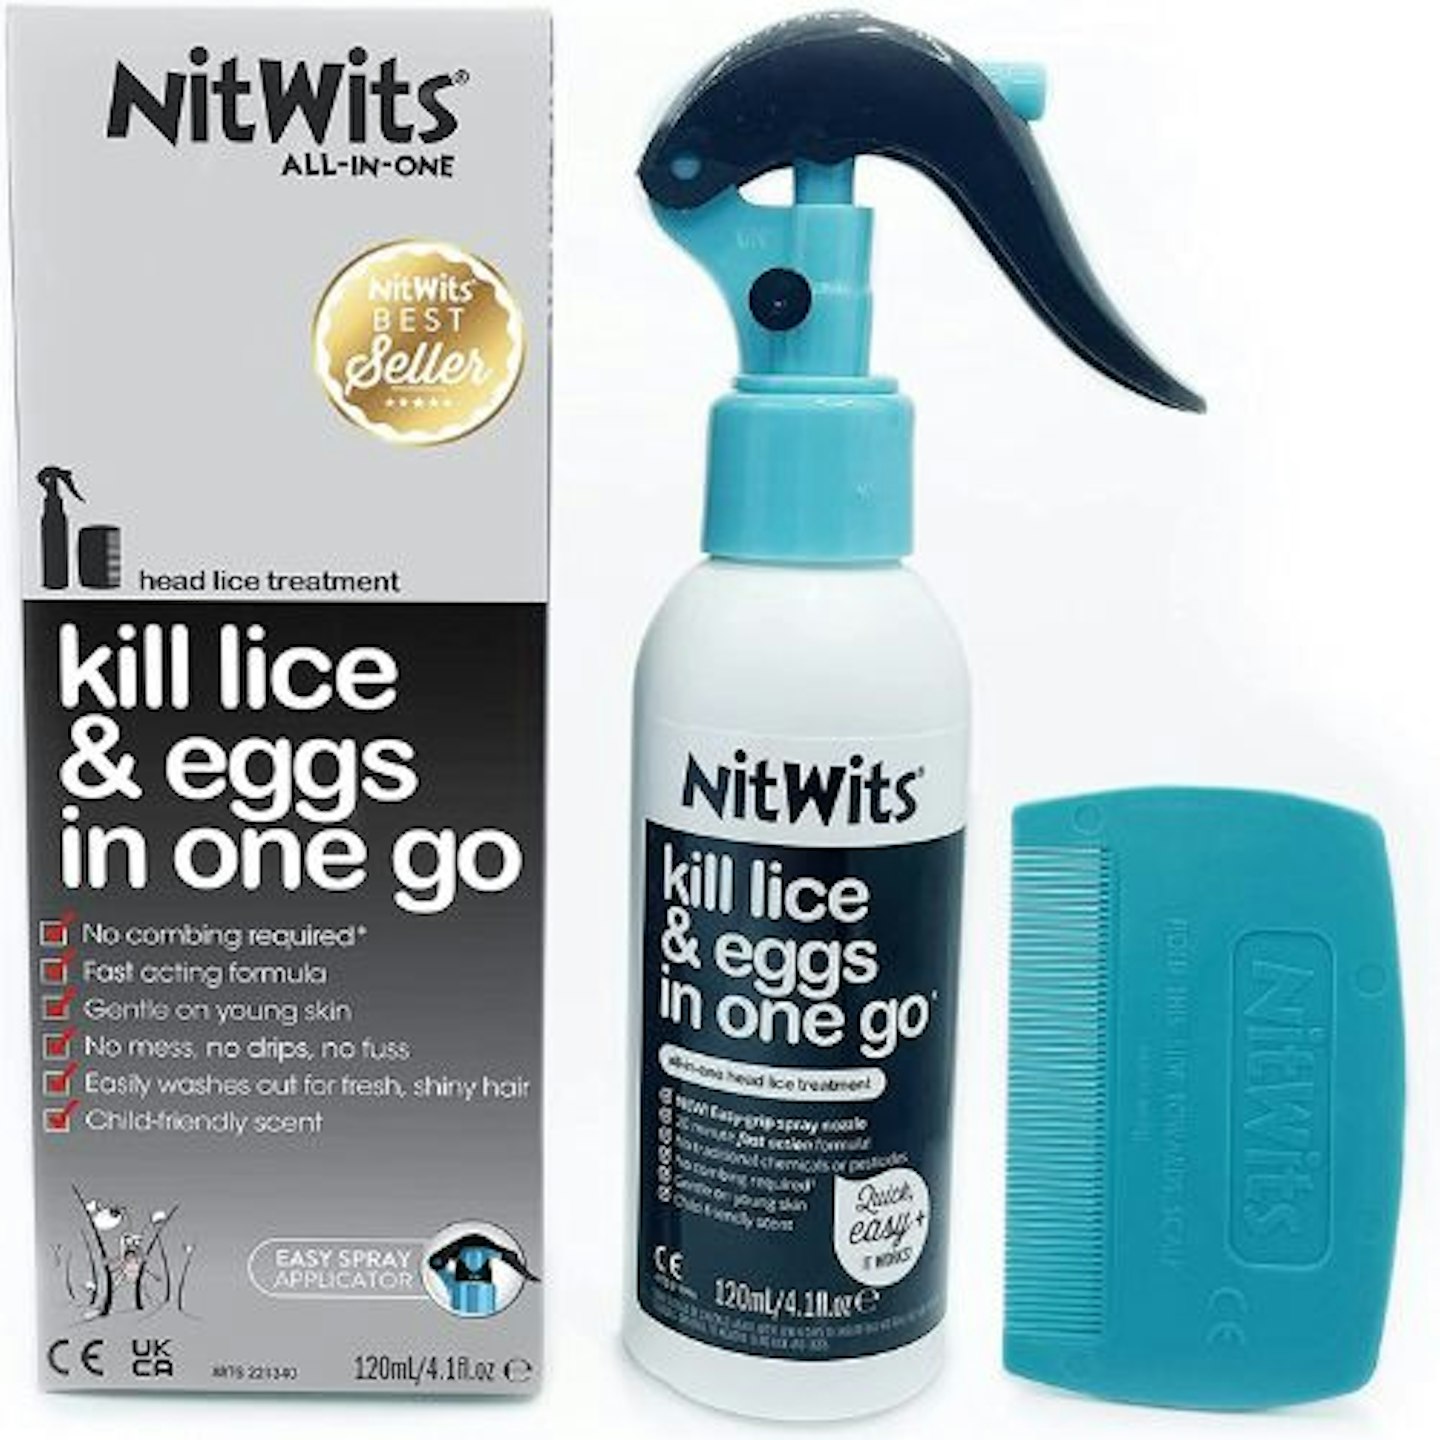 best-head-lice-treatments-and-products-nitwits-spray-treatment